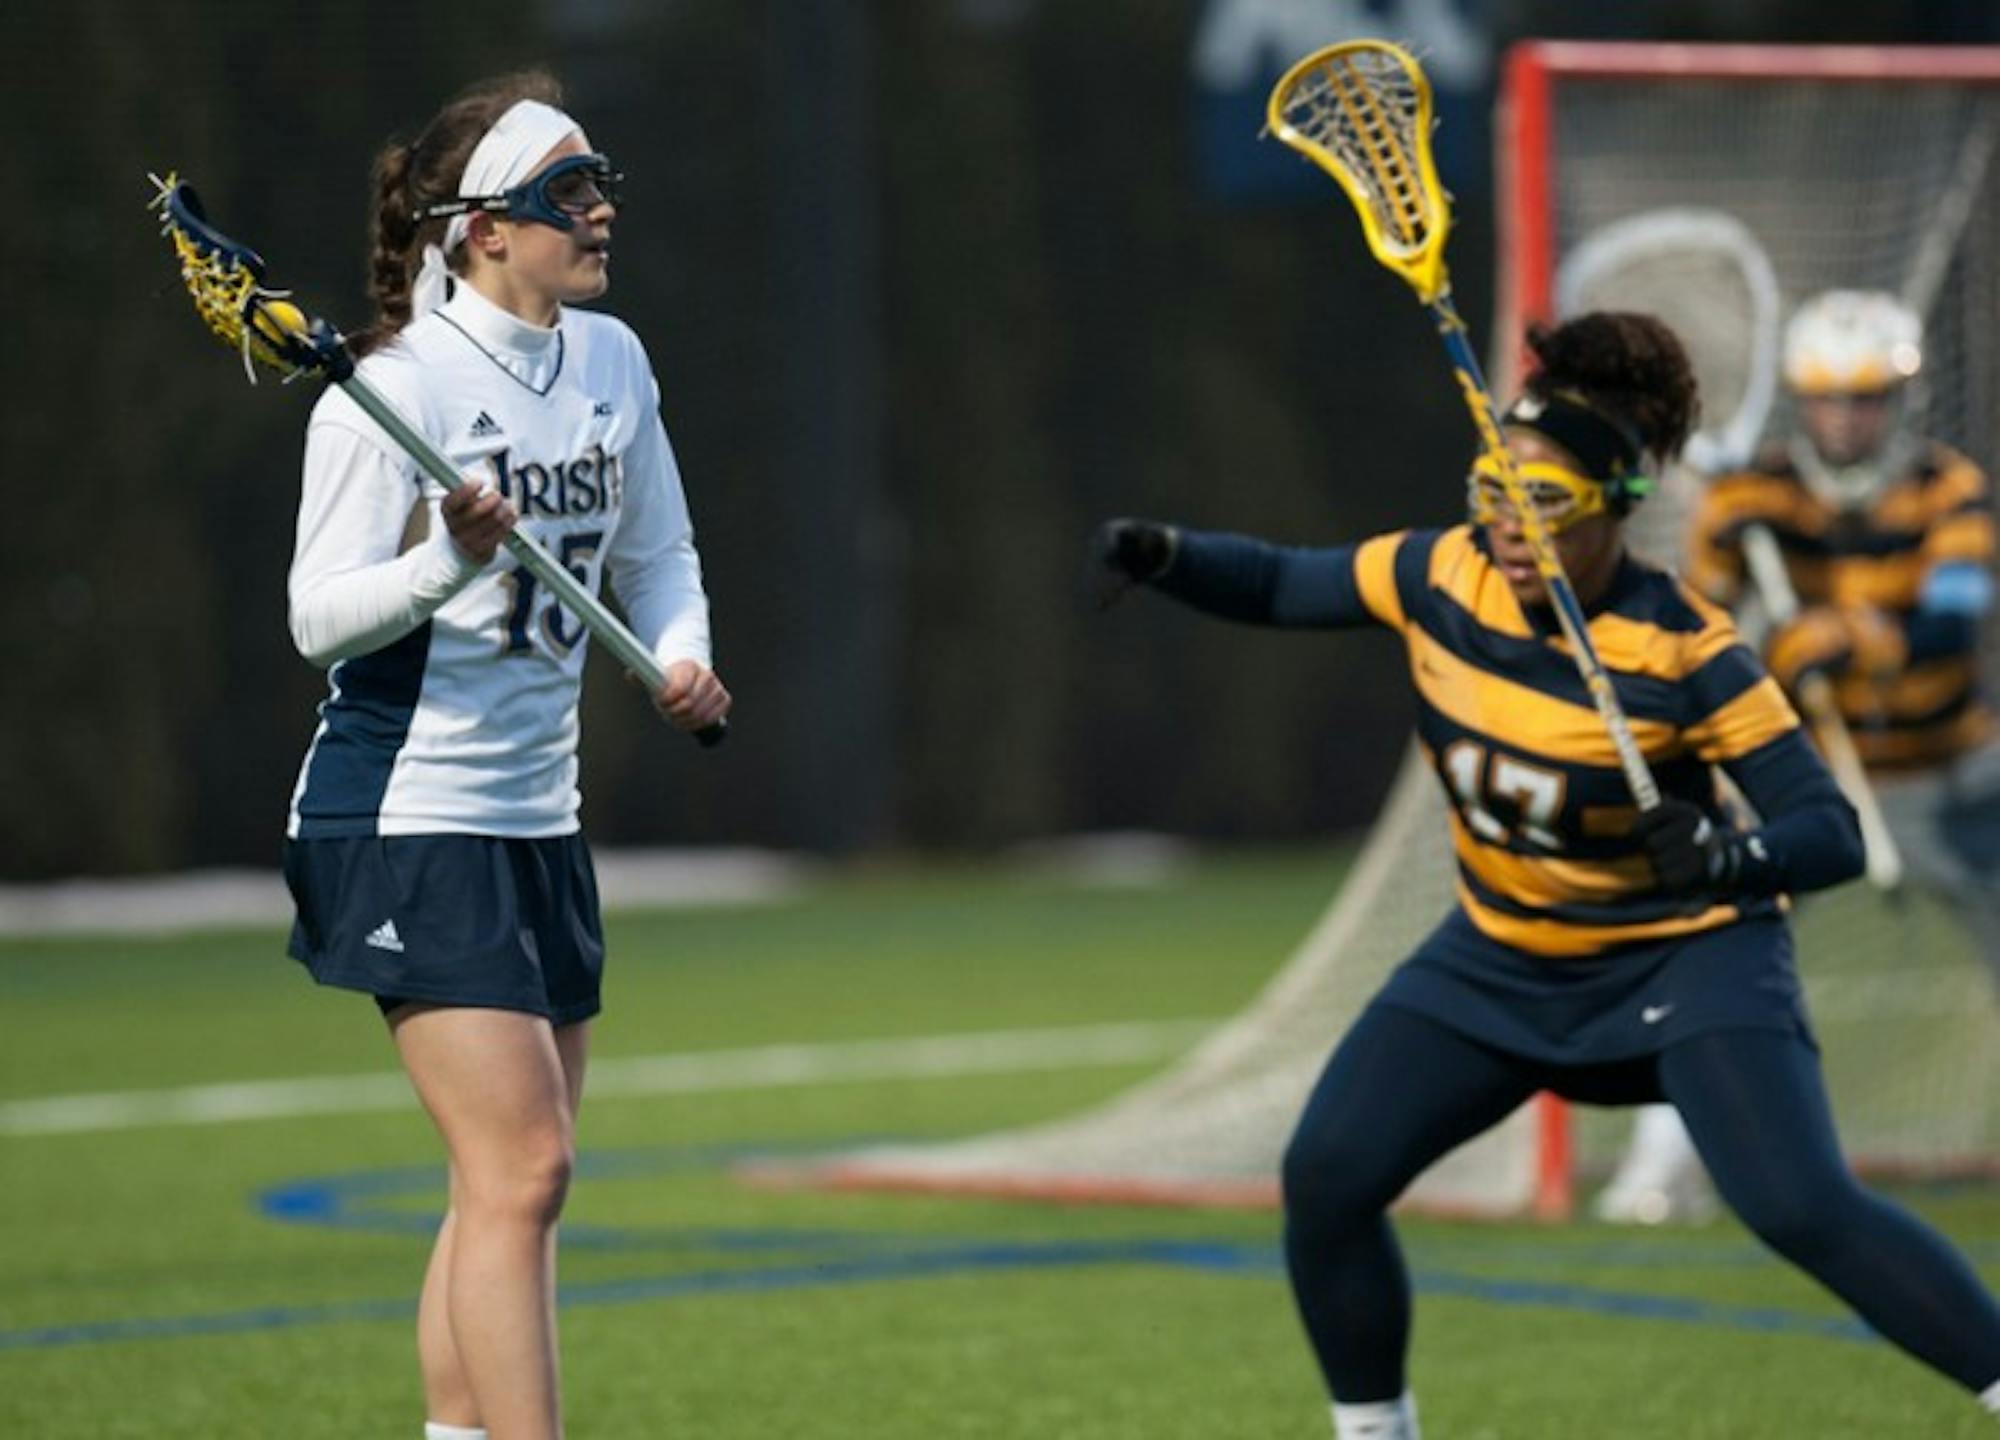 Freshman attack Cortney Fortunato surveys the field during Wednesday's game against Marquette